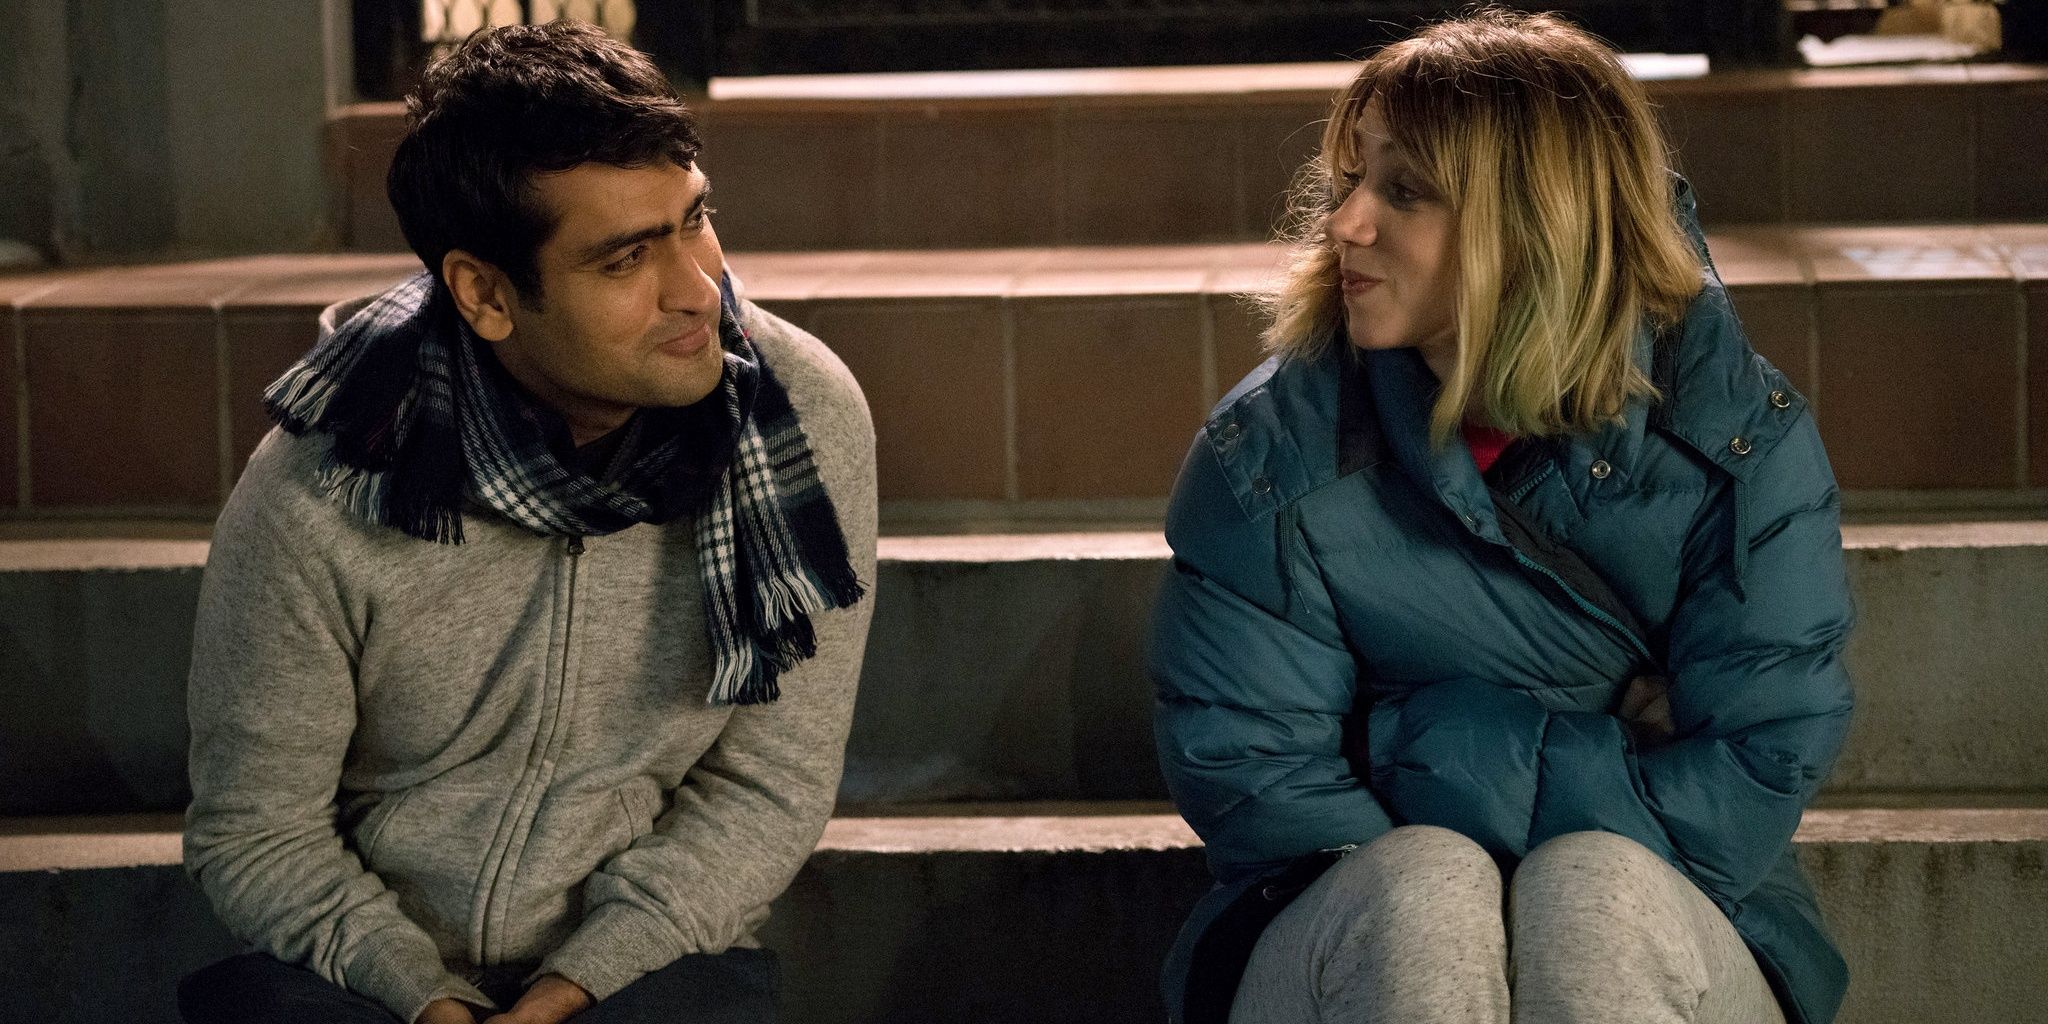 The Big Sick - Kumail and Emily